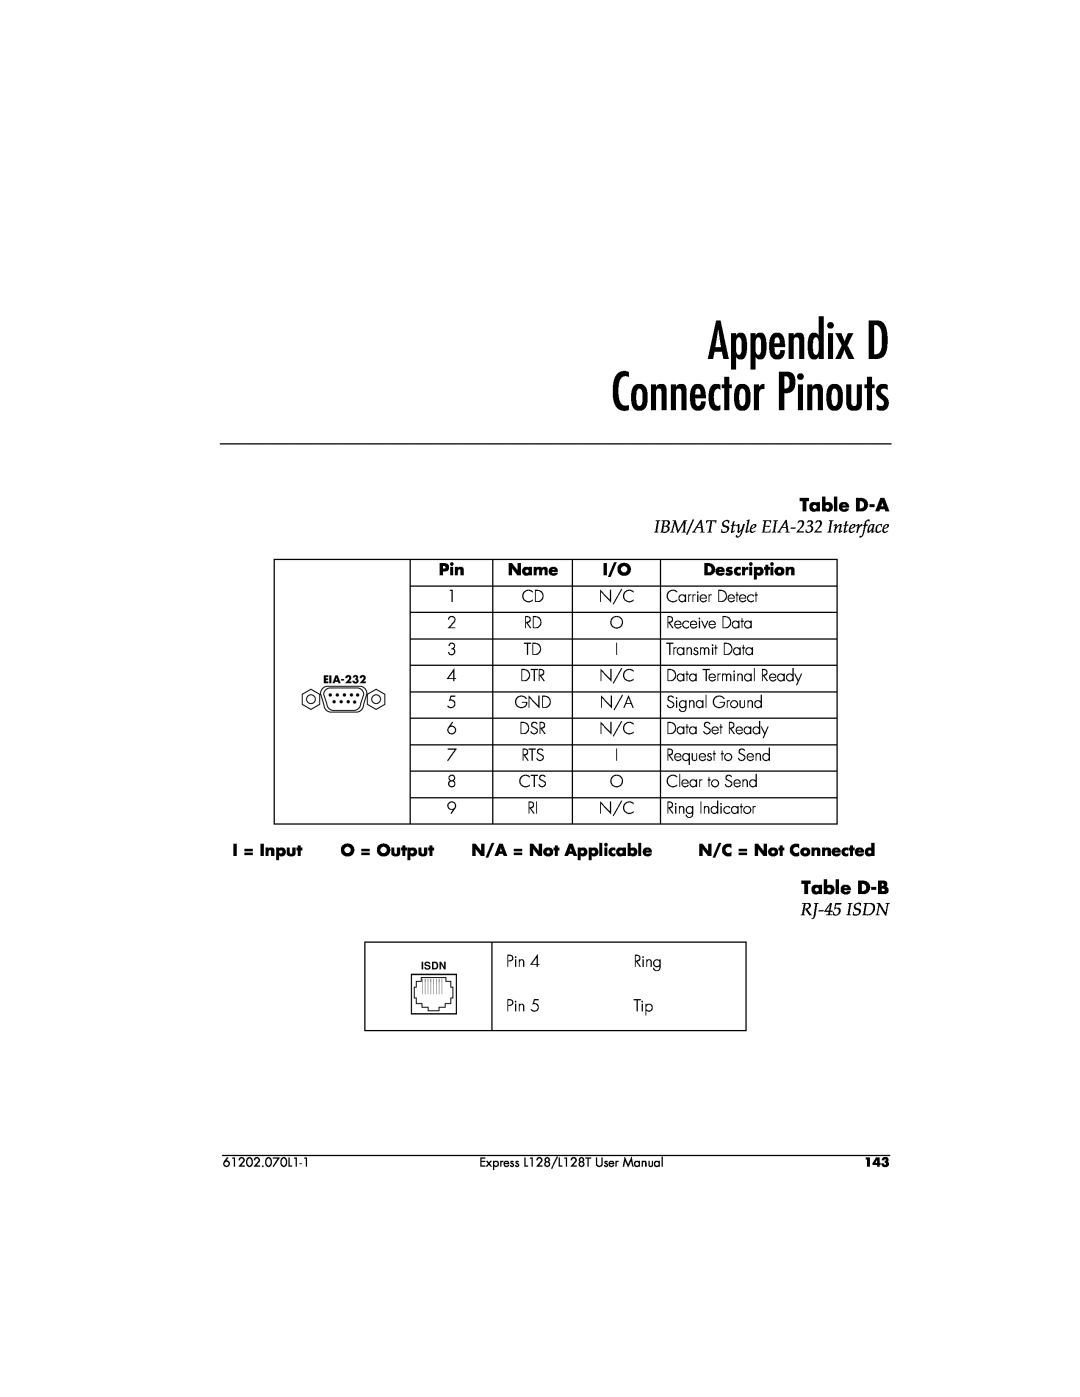 ADTRAN L128T user manual Appendix D Connector Pinouts, Table D-A, IBM/AT Style EIA-232 Interface, Table D-B, RJ-45 ISDN 